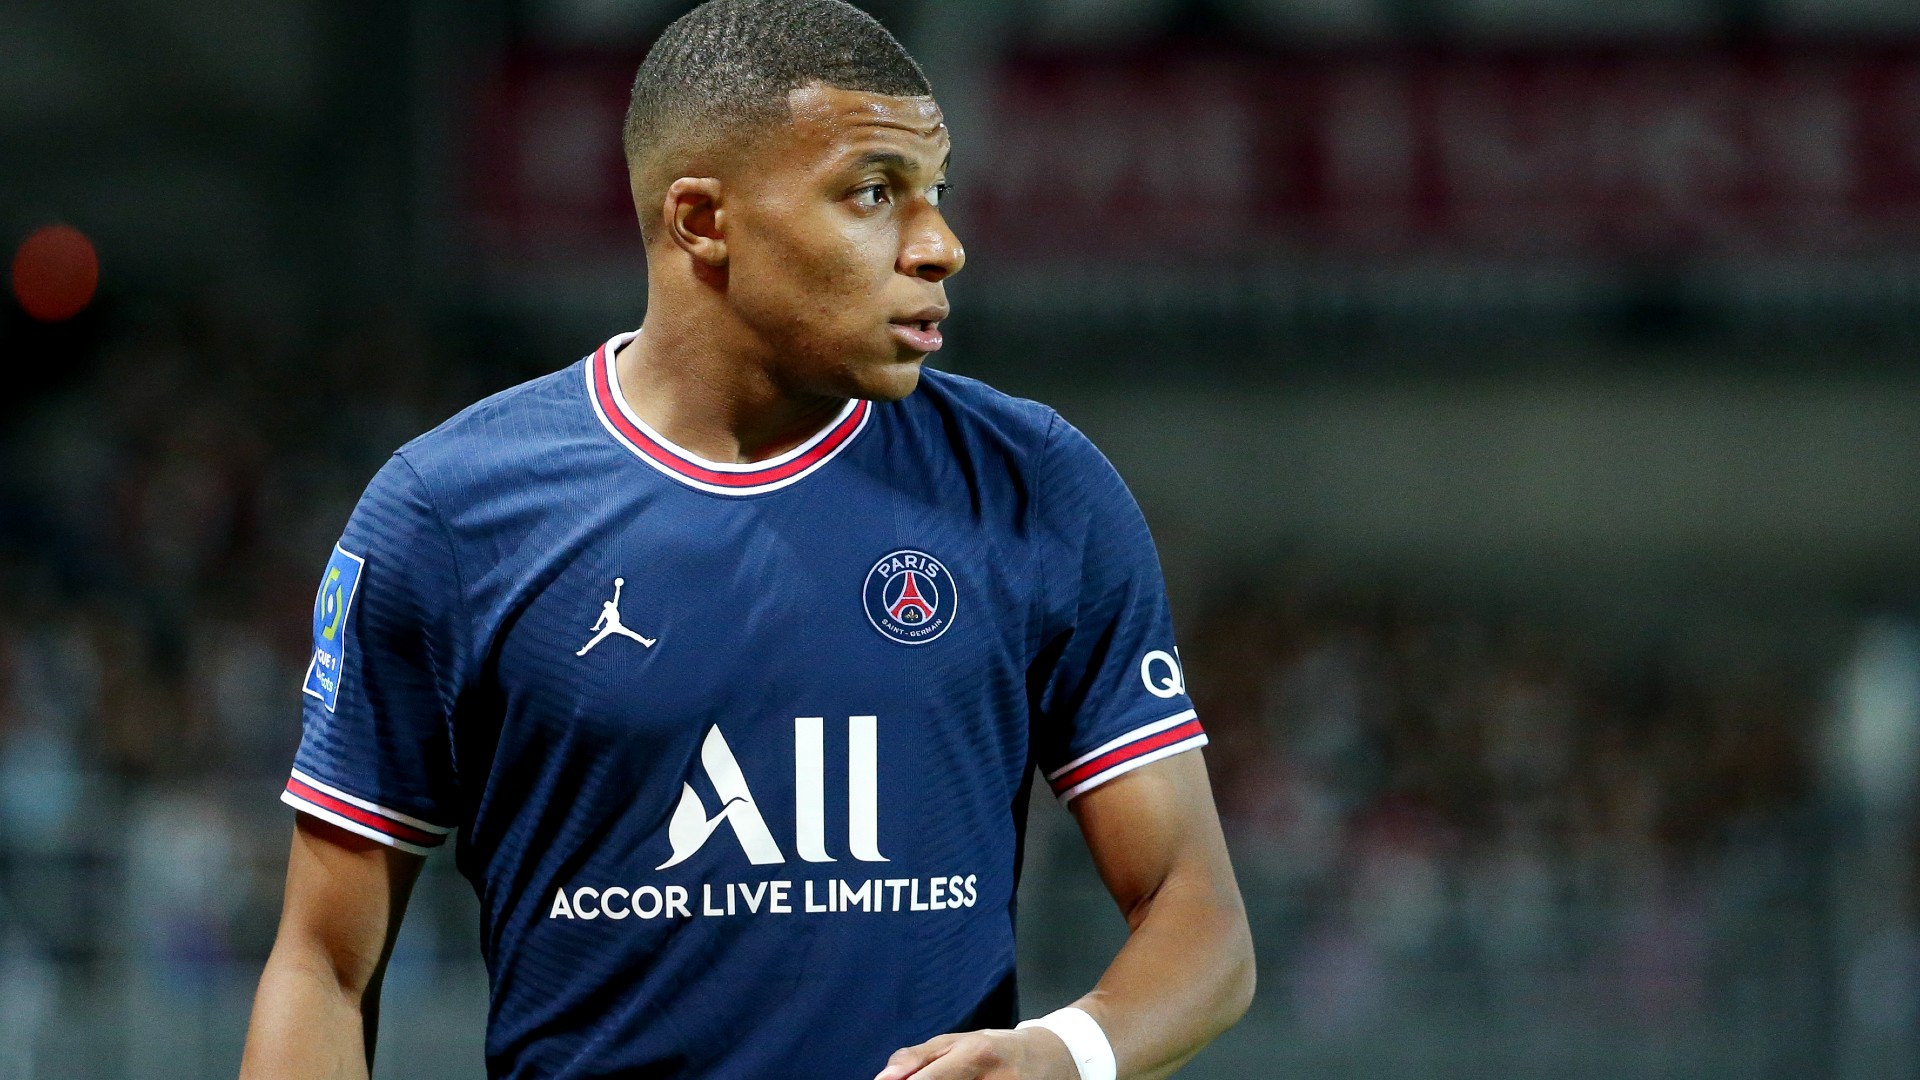 PSG's Kylian Mbappe to Real Madrid: Latest updates on the transfer saga